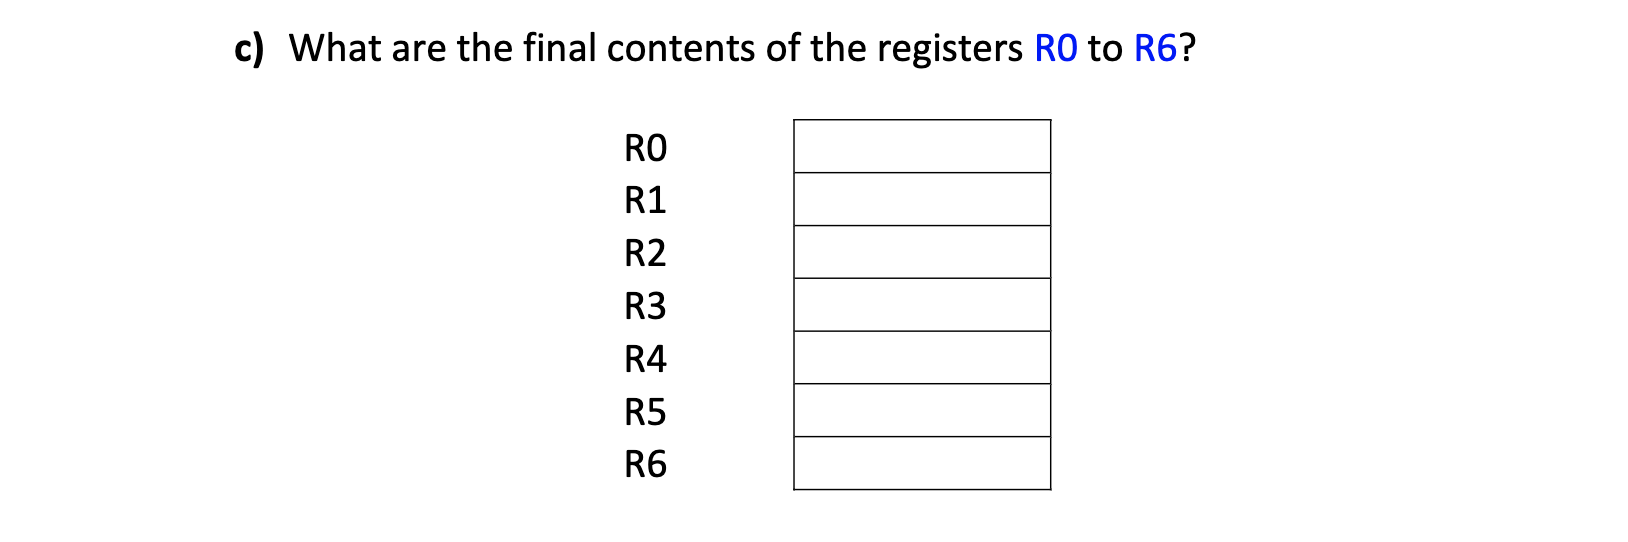 c) What are the final contents of the registers RO to R6? RO R1 R2 R3 R4 R5 R6